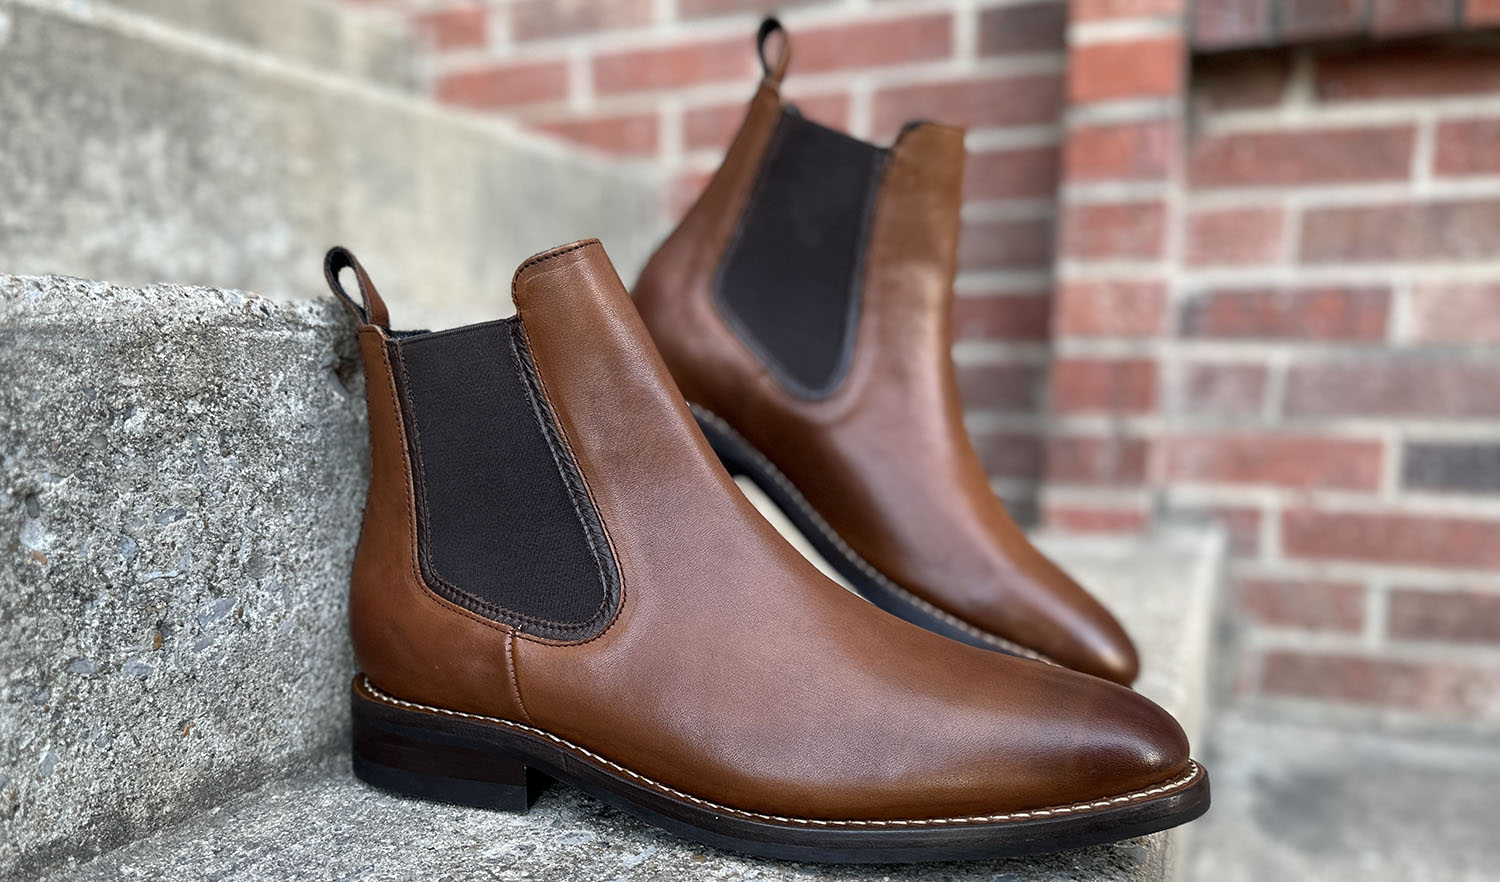 In Review: Thursday Boot Duke Boots